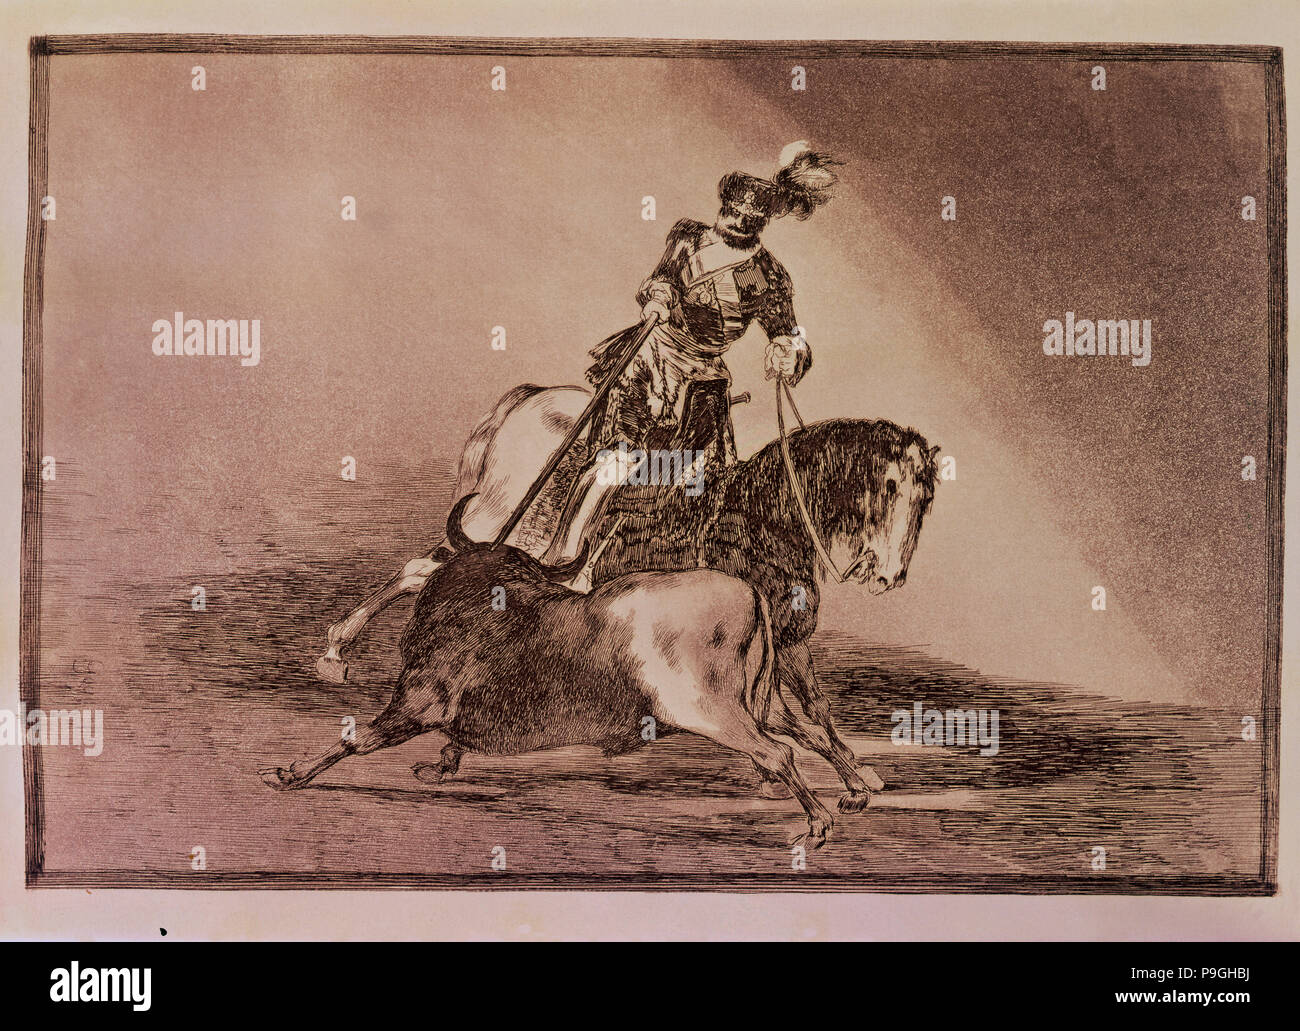 Bullfighting, series of etchings by Francisco de Goya. Plate 11: 'The Cid Campeador lancing anoth… Stock Photo